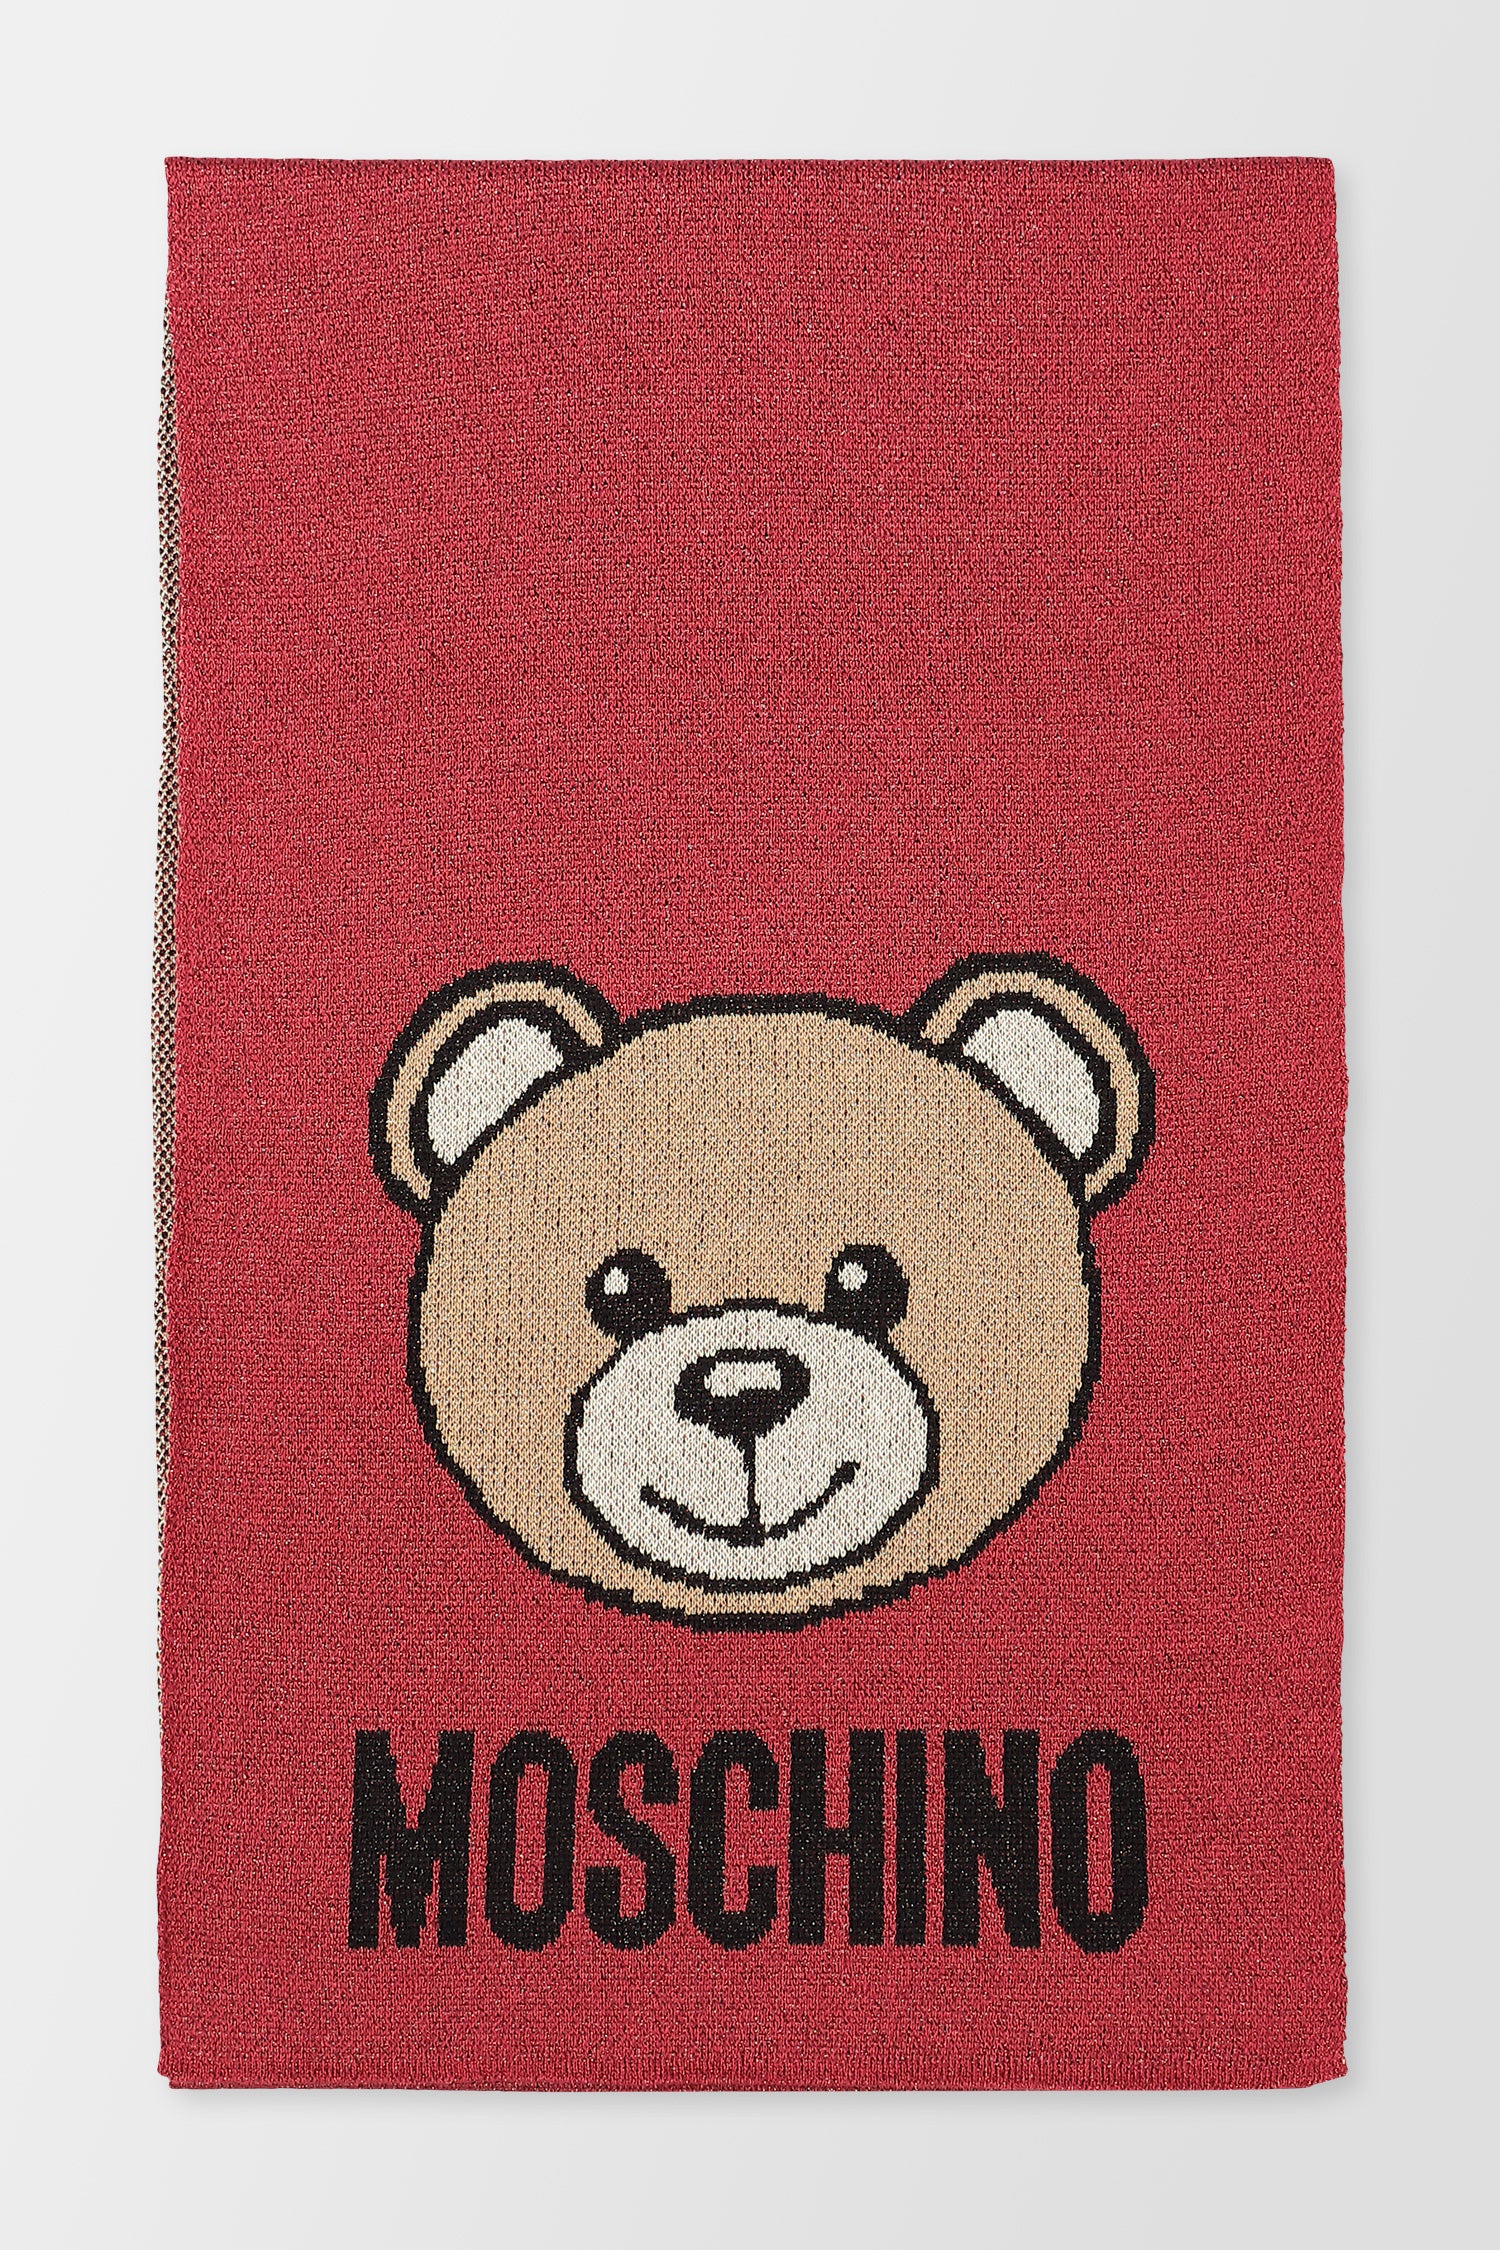 Moschino Red Teddy Printed Scarf